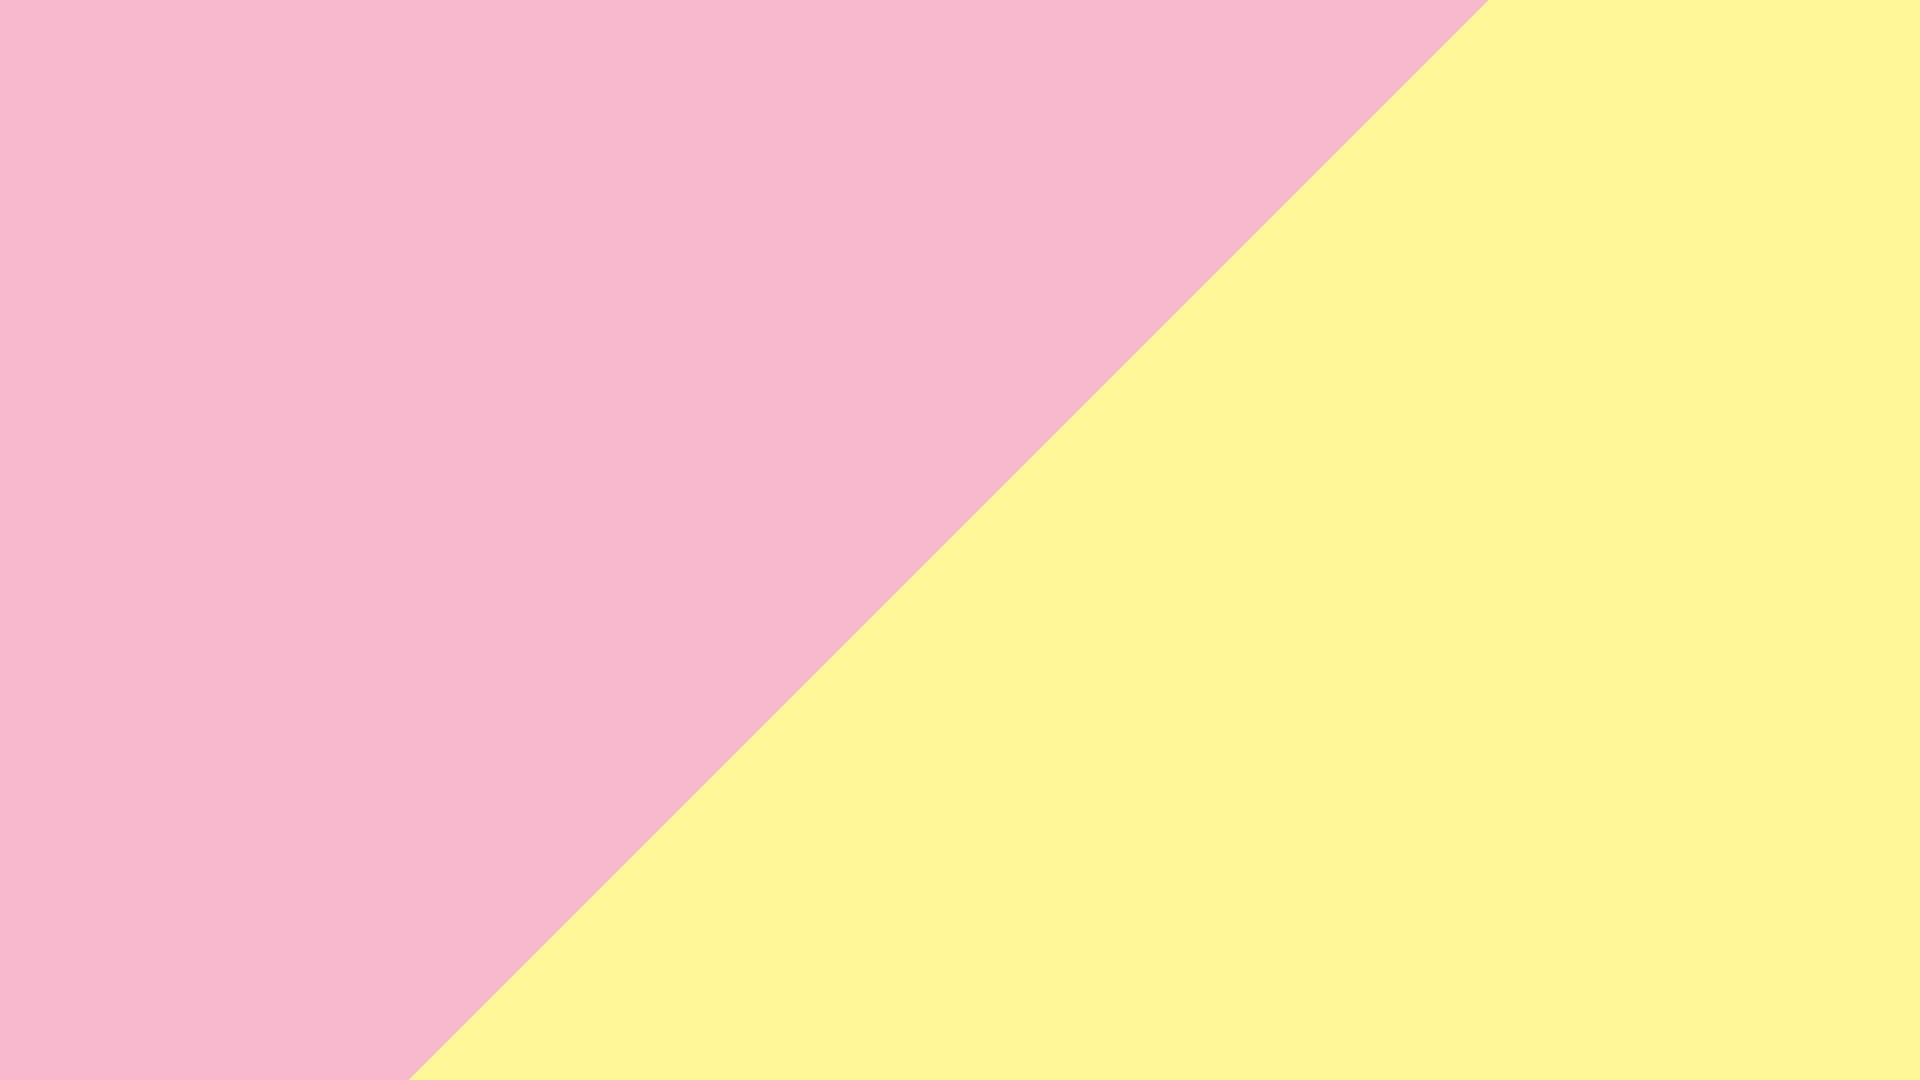 Aesthetic Wallpaper Yellow And Pink / Search your top hd images for